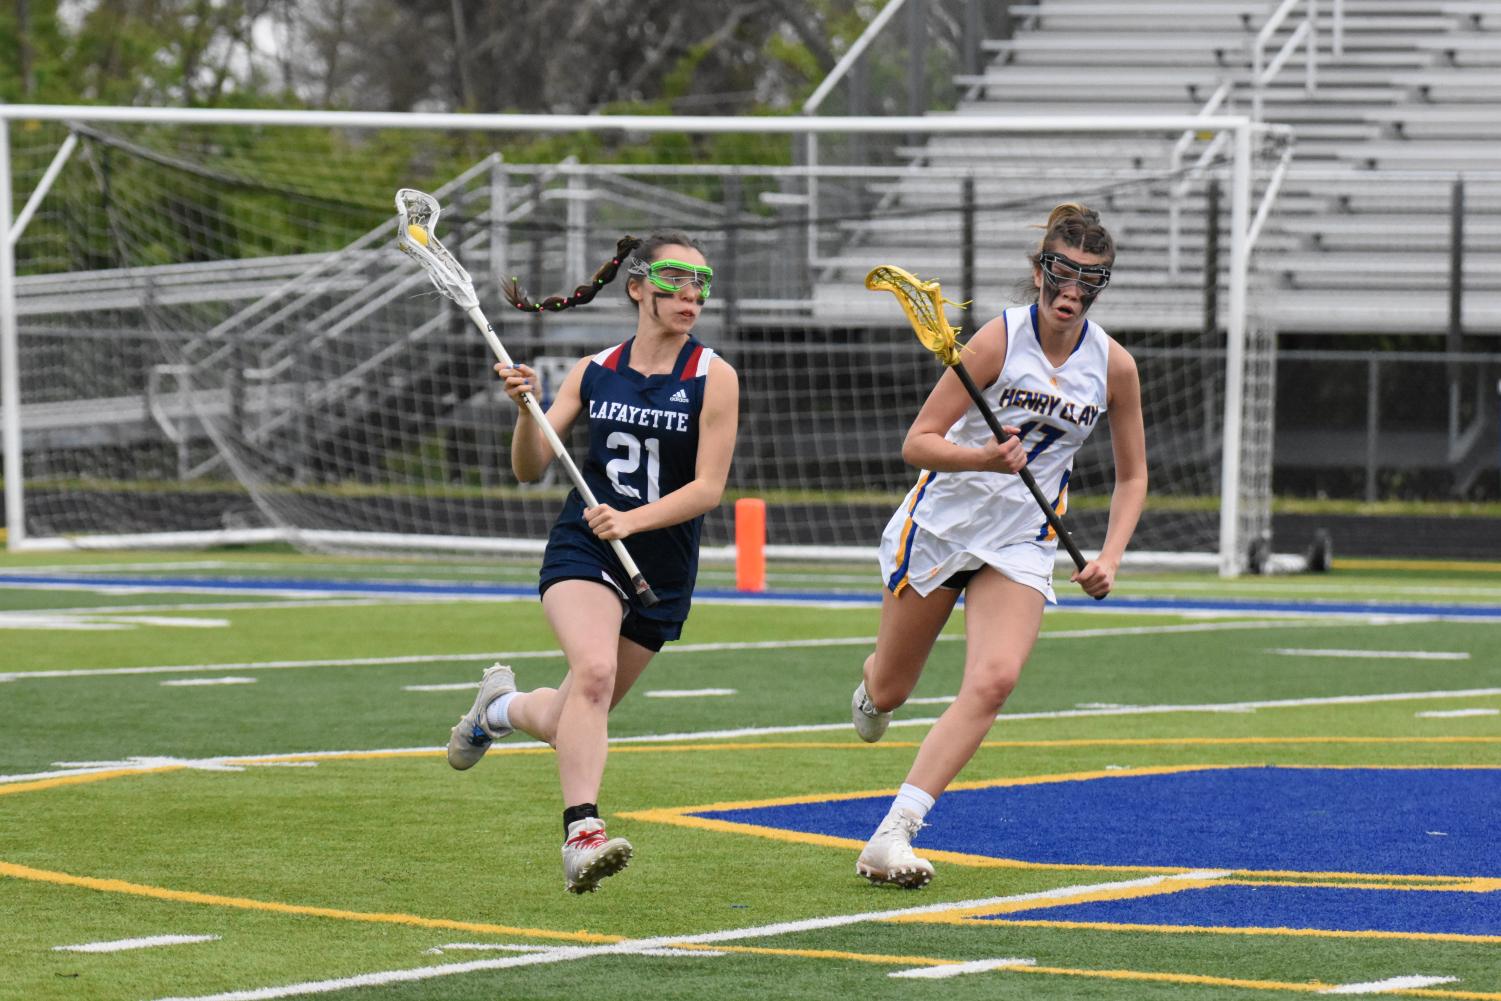 [LEXINGTON, KY] (21) Lucy Griffeth runs upfield during Lafayette High Schools Varsity Girls Lacrosse game against Henry Clay. Henry Clay won 21-6.